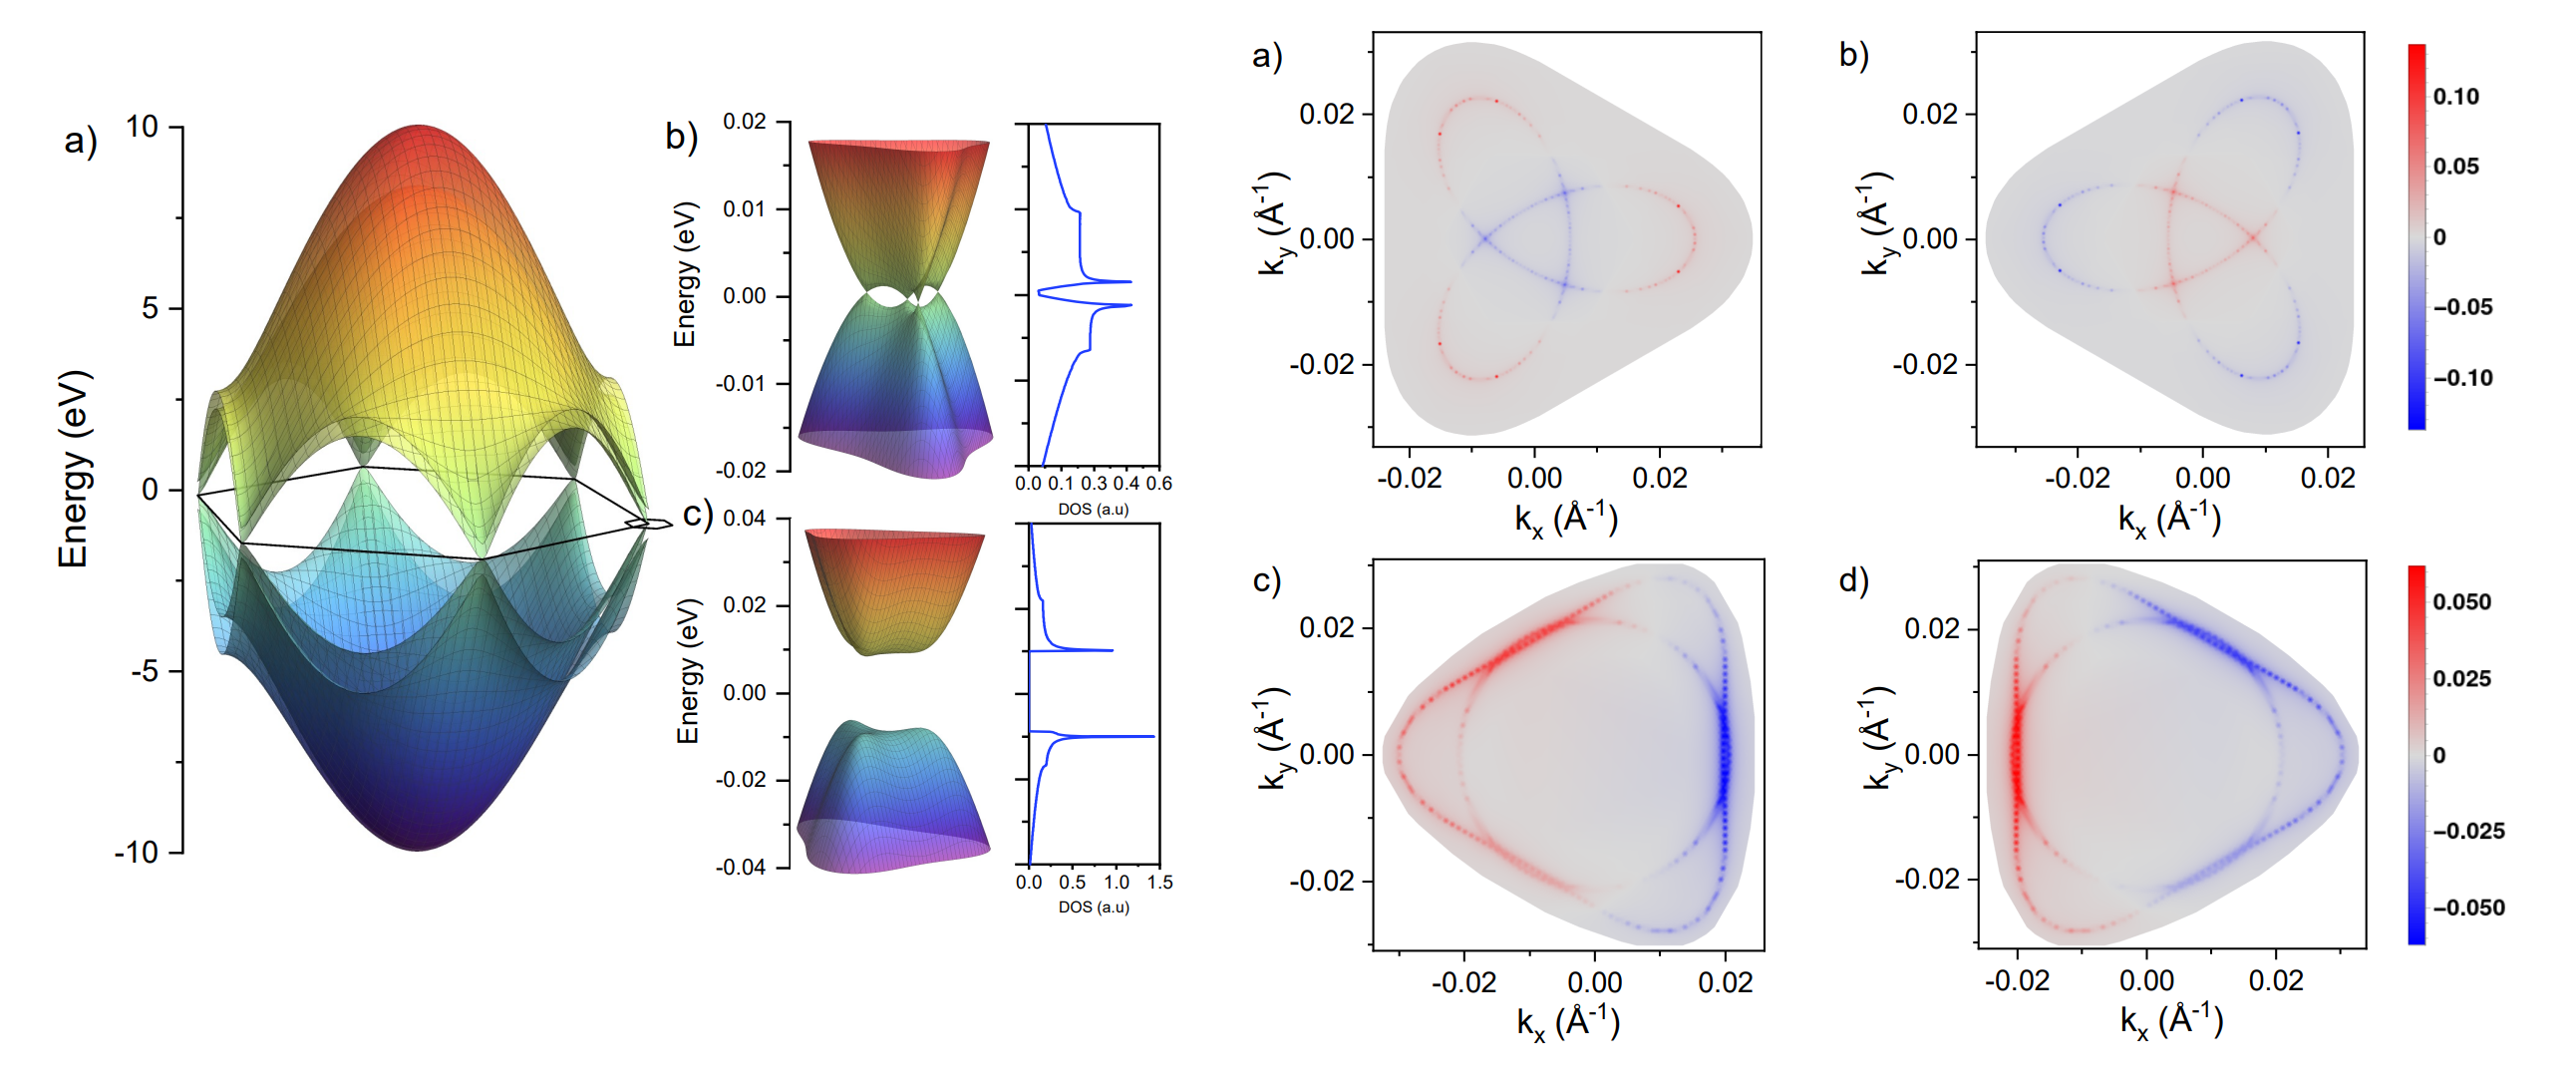 Superconductivity and correlated phases in non-twisted bilayer and trilayer graphene